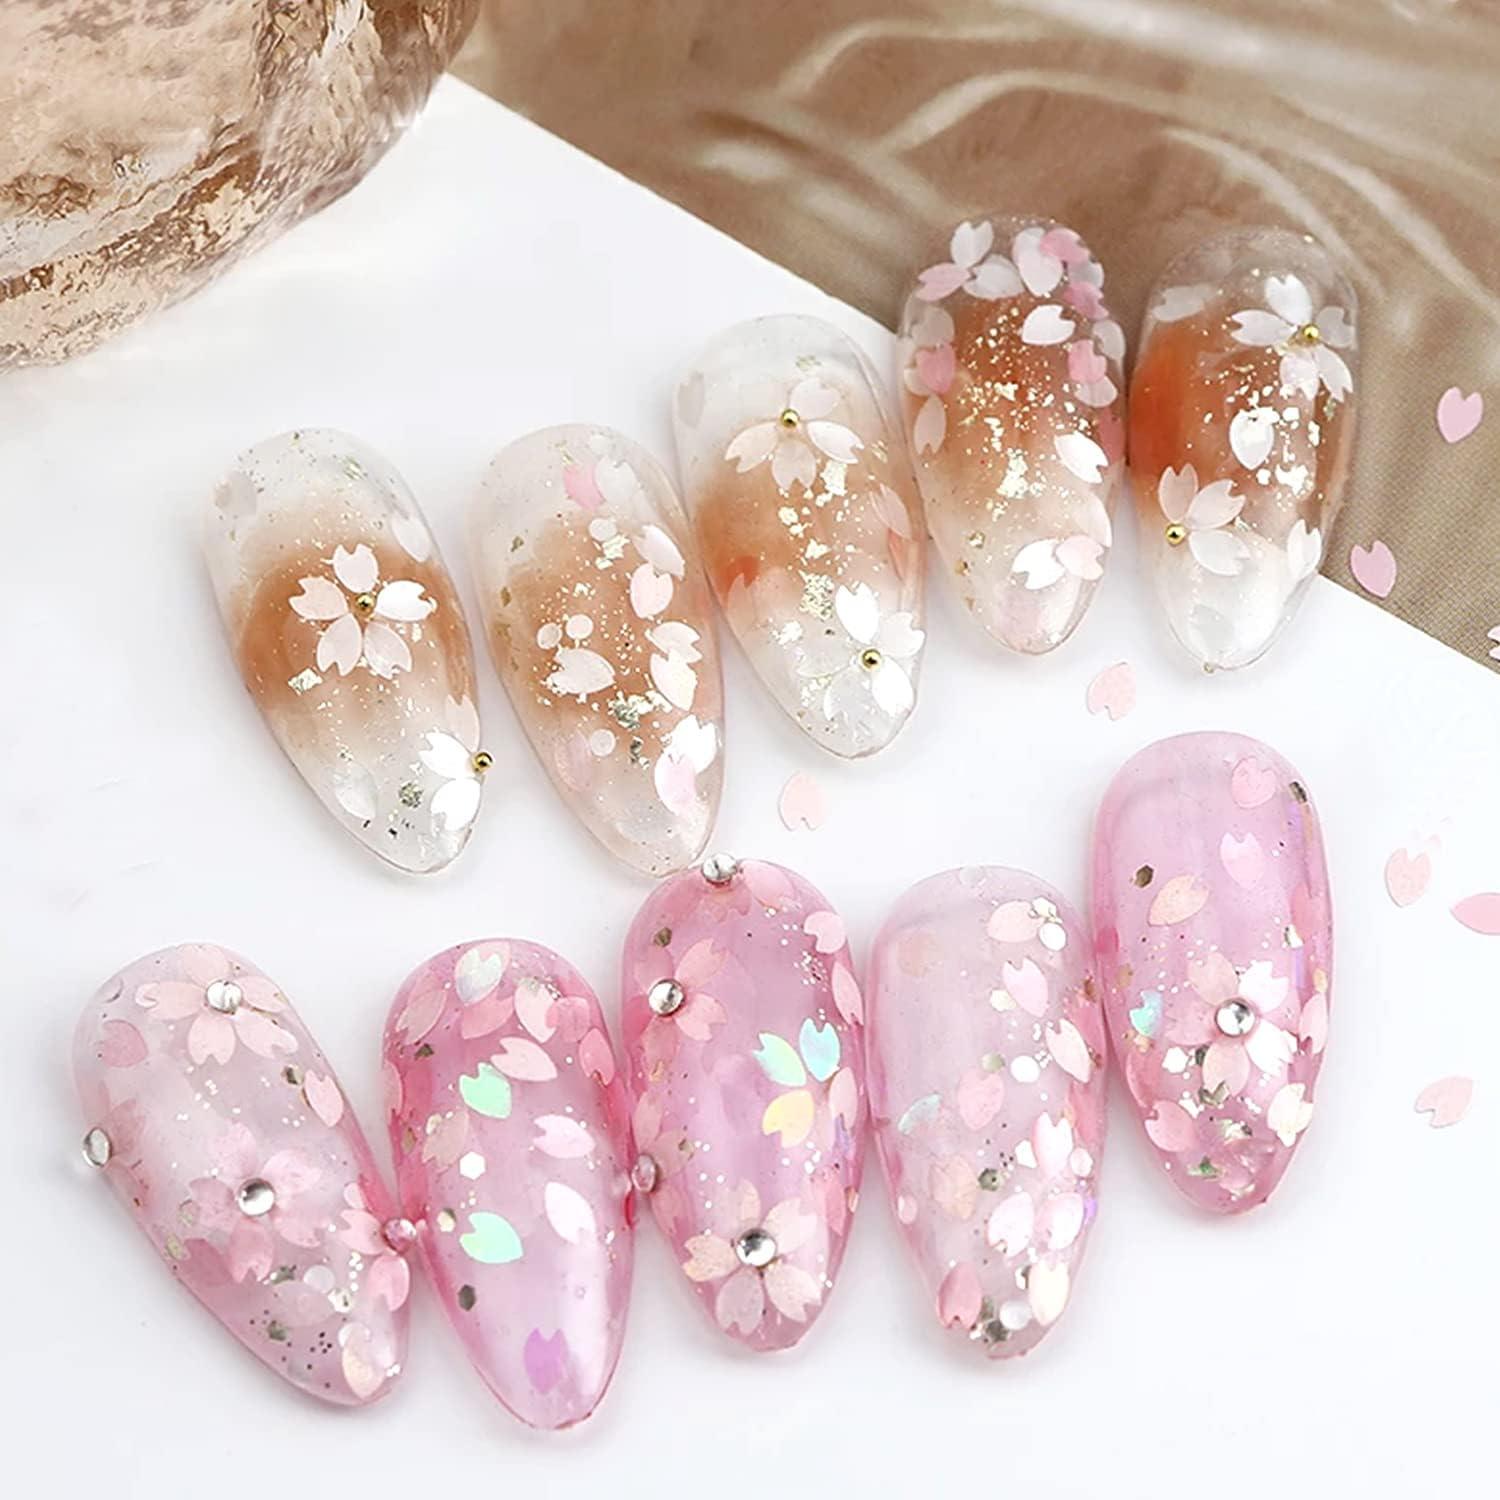 3D Nail Art Designs Ideas To Try In 2023 - MyGlamm